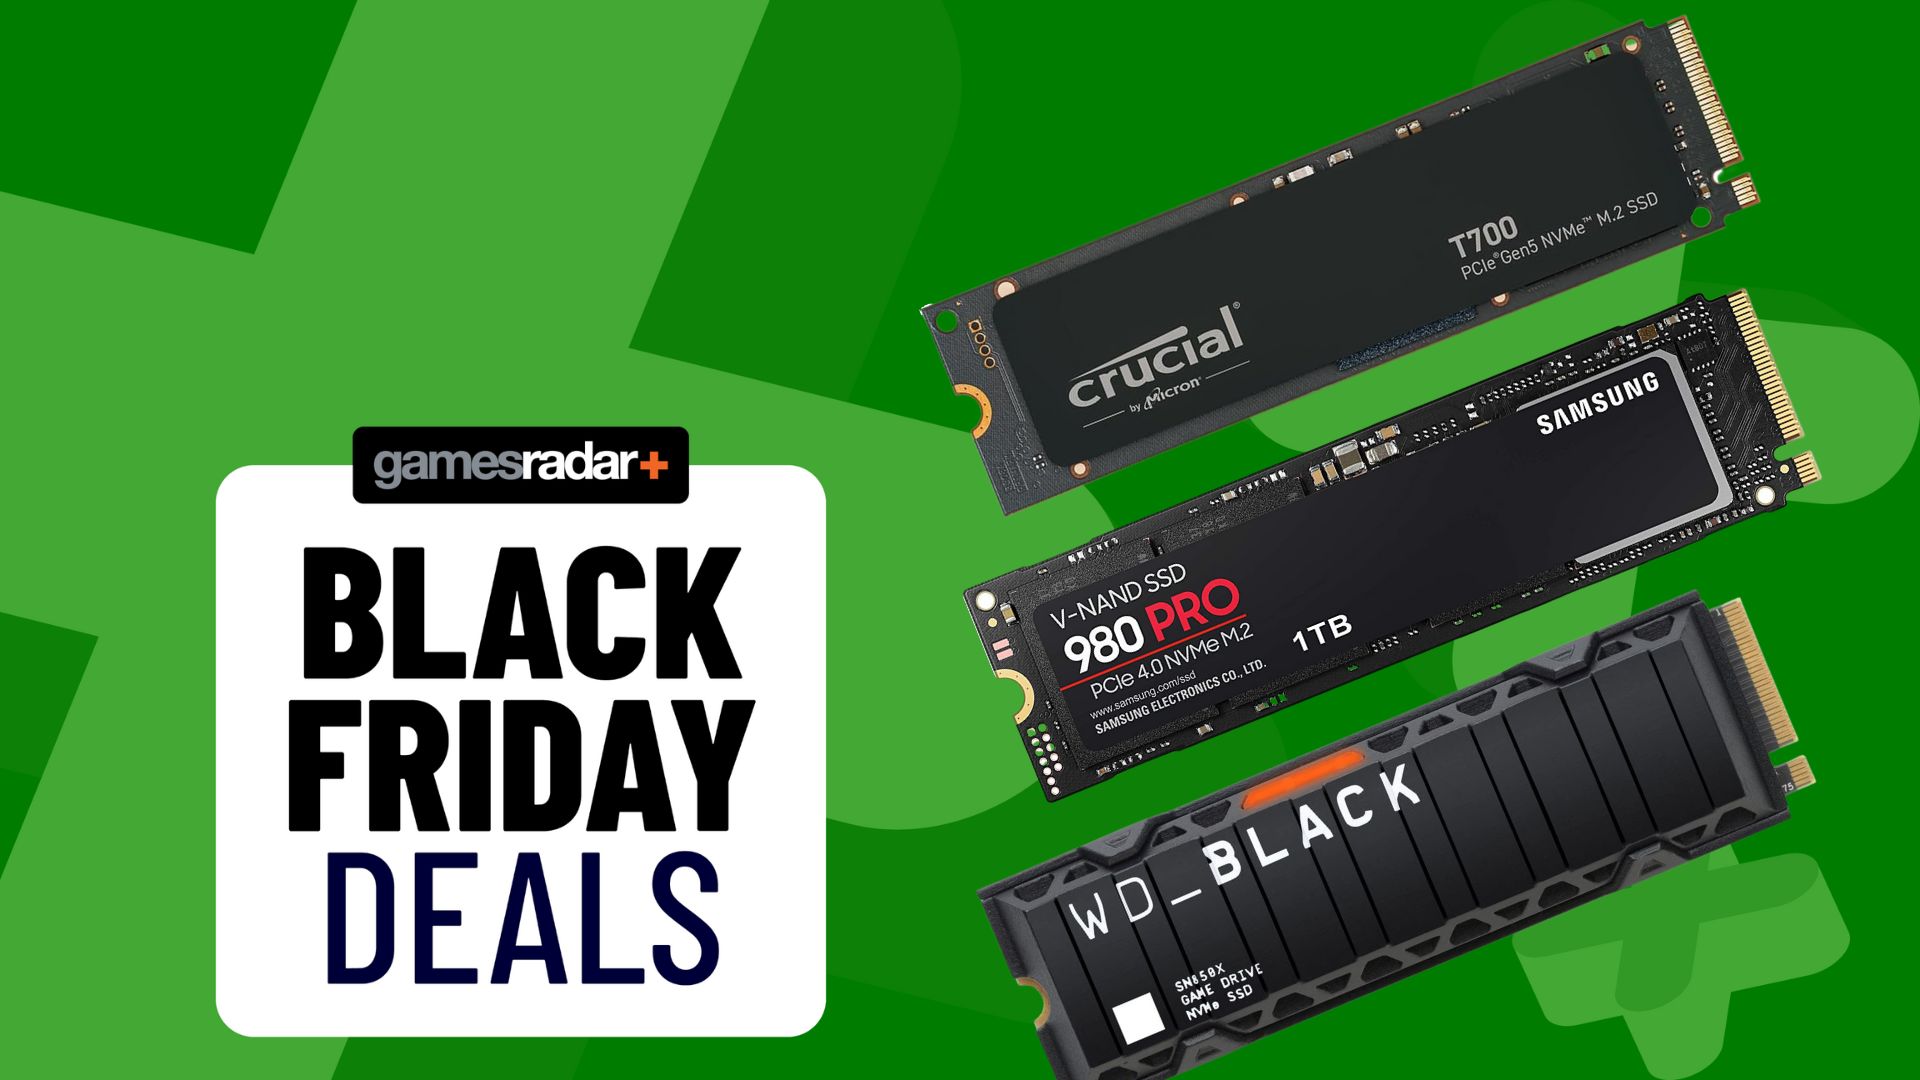 This Crucial X8 1TB SSD is down to its lowest price at  in an early  Black Friday deal